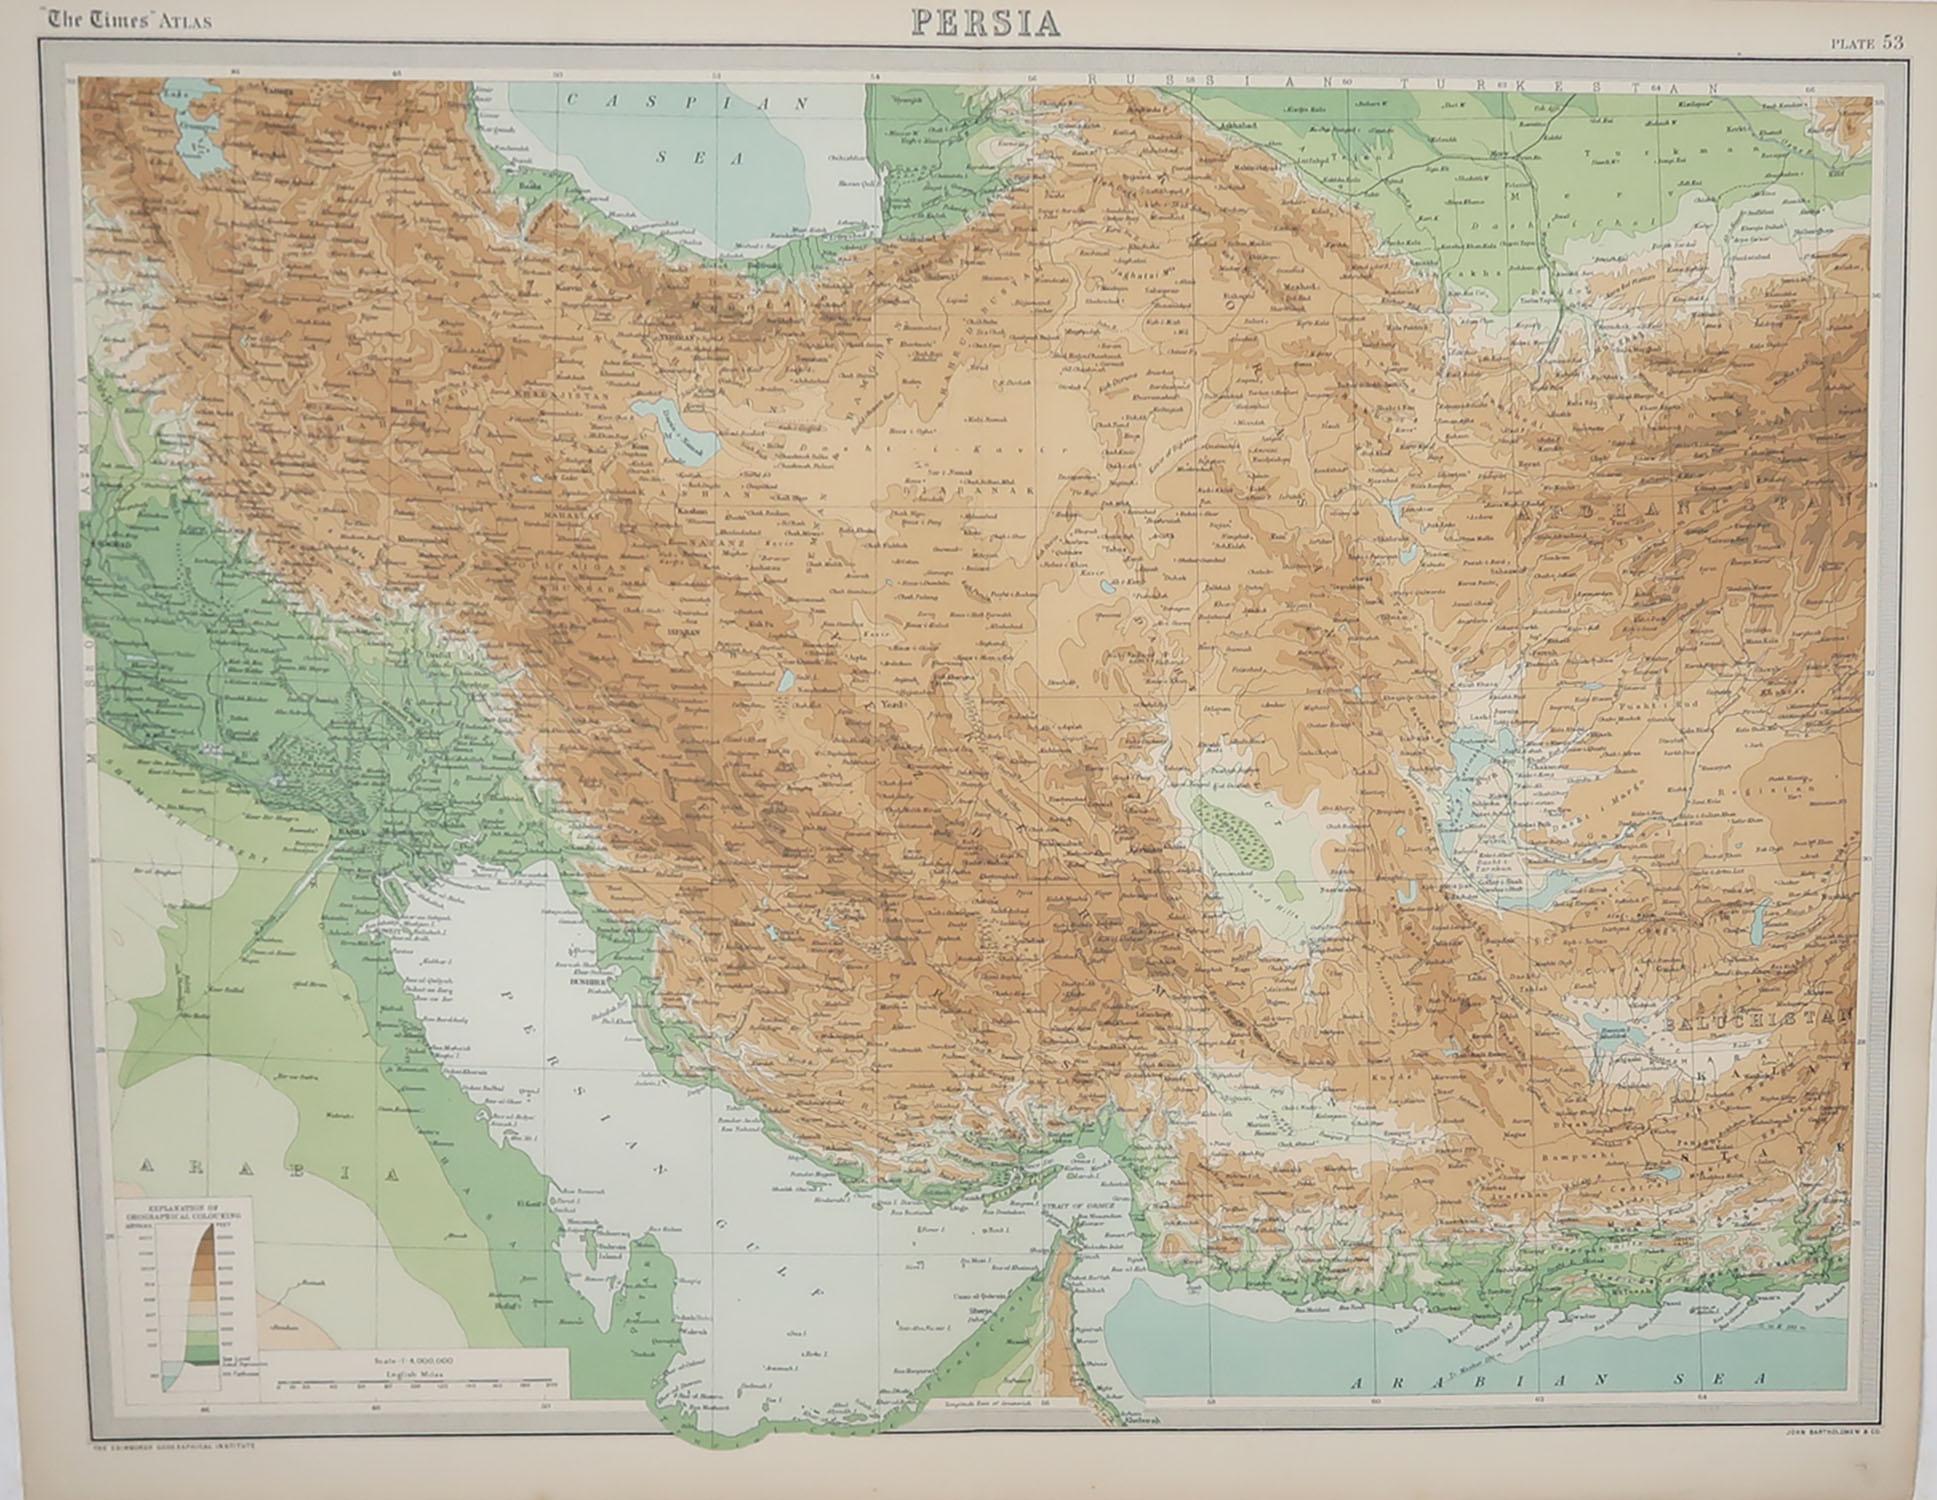 Great maps of Persia

Unframed

Original color

By John Bartholomew and Co. Edinburgh Geographical Institute

Published, circa 1920

Free shipping.
  